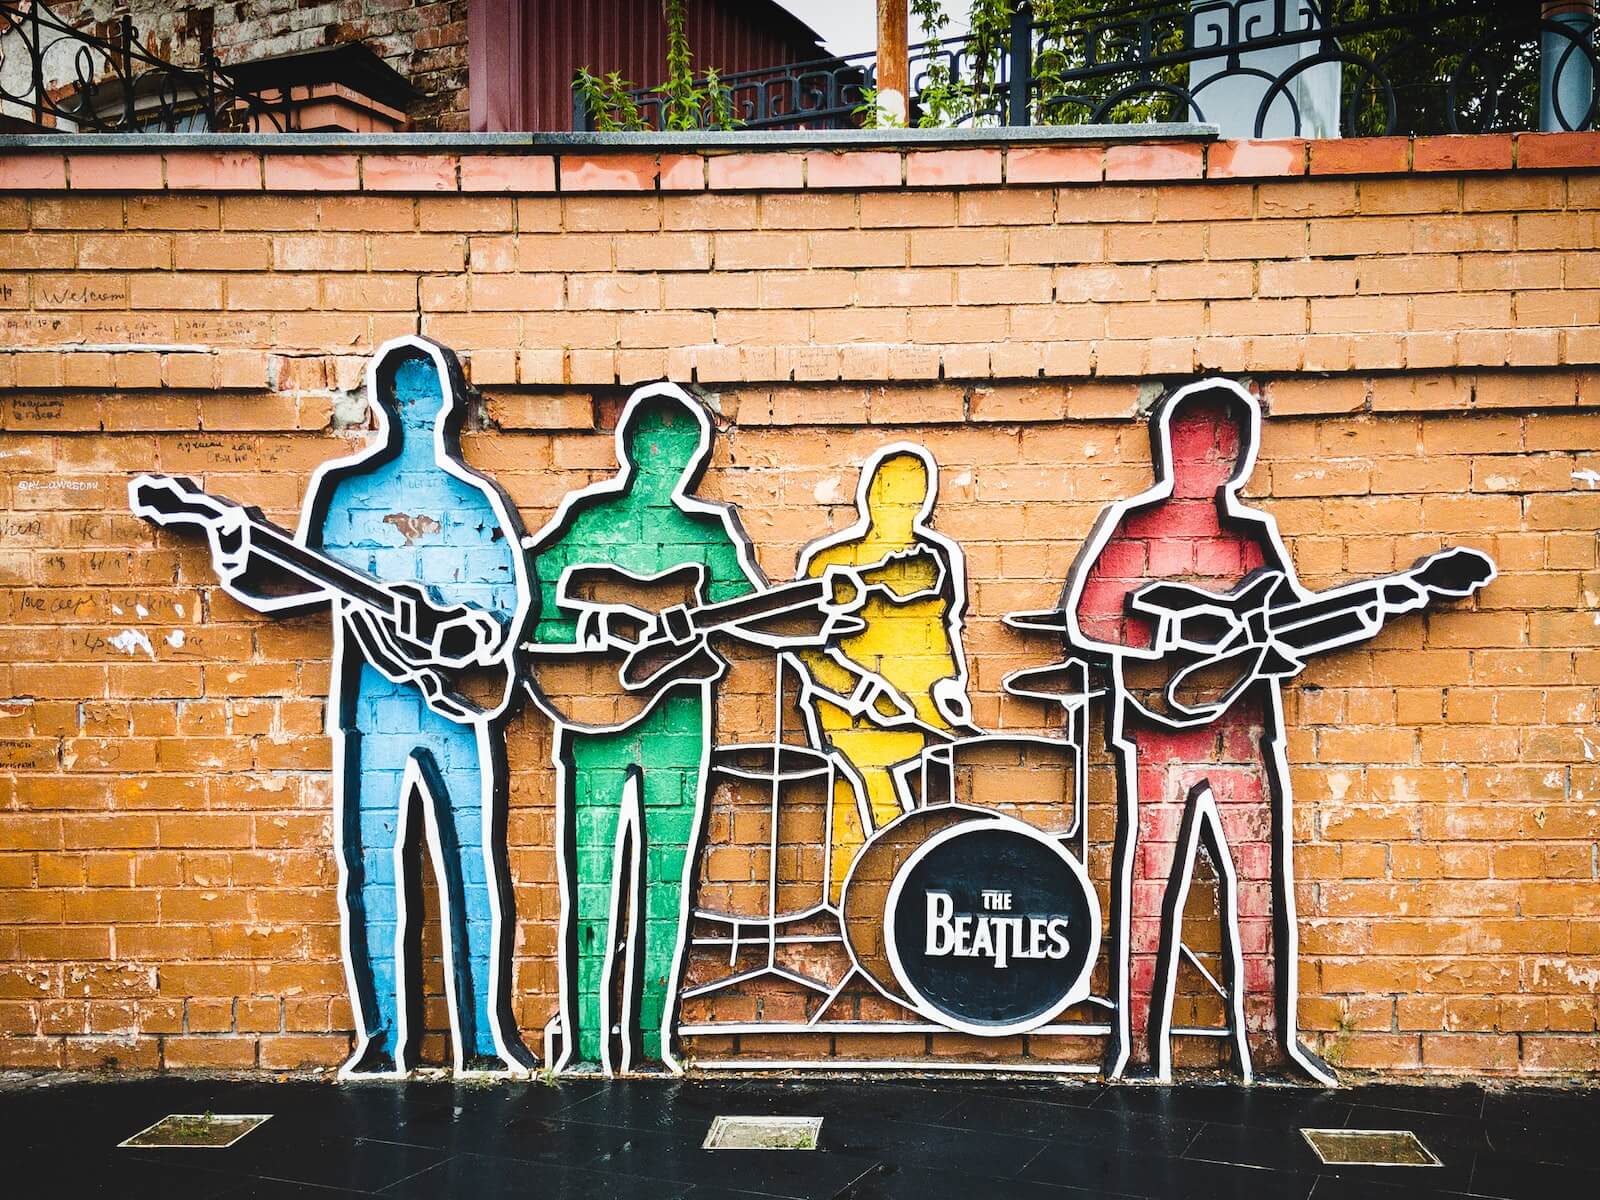 The Beatles tribute artwork on wall